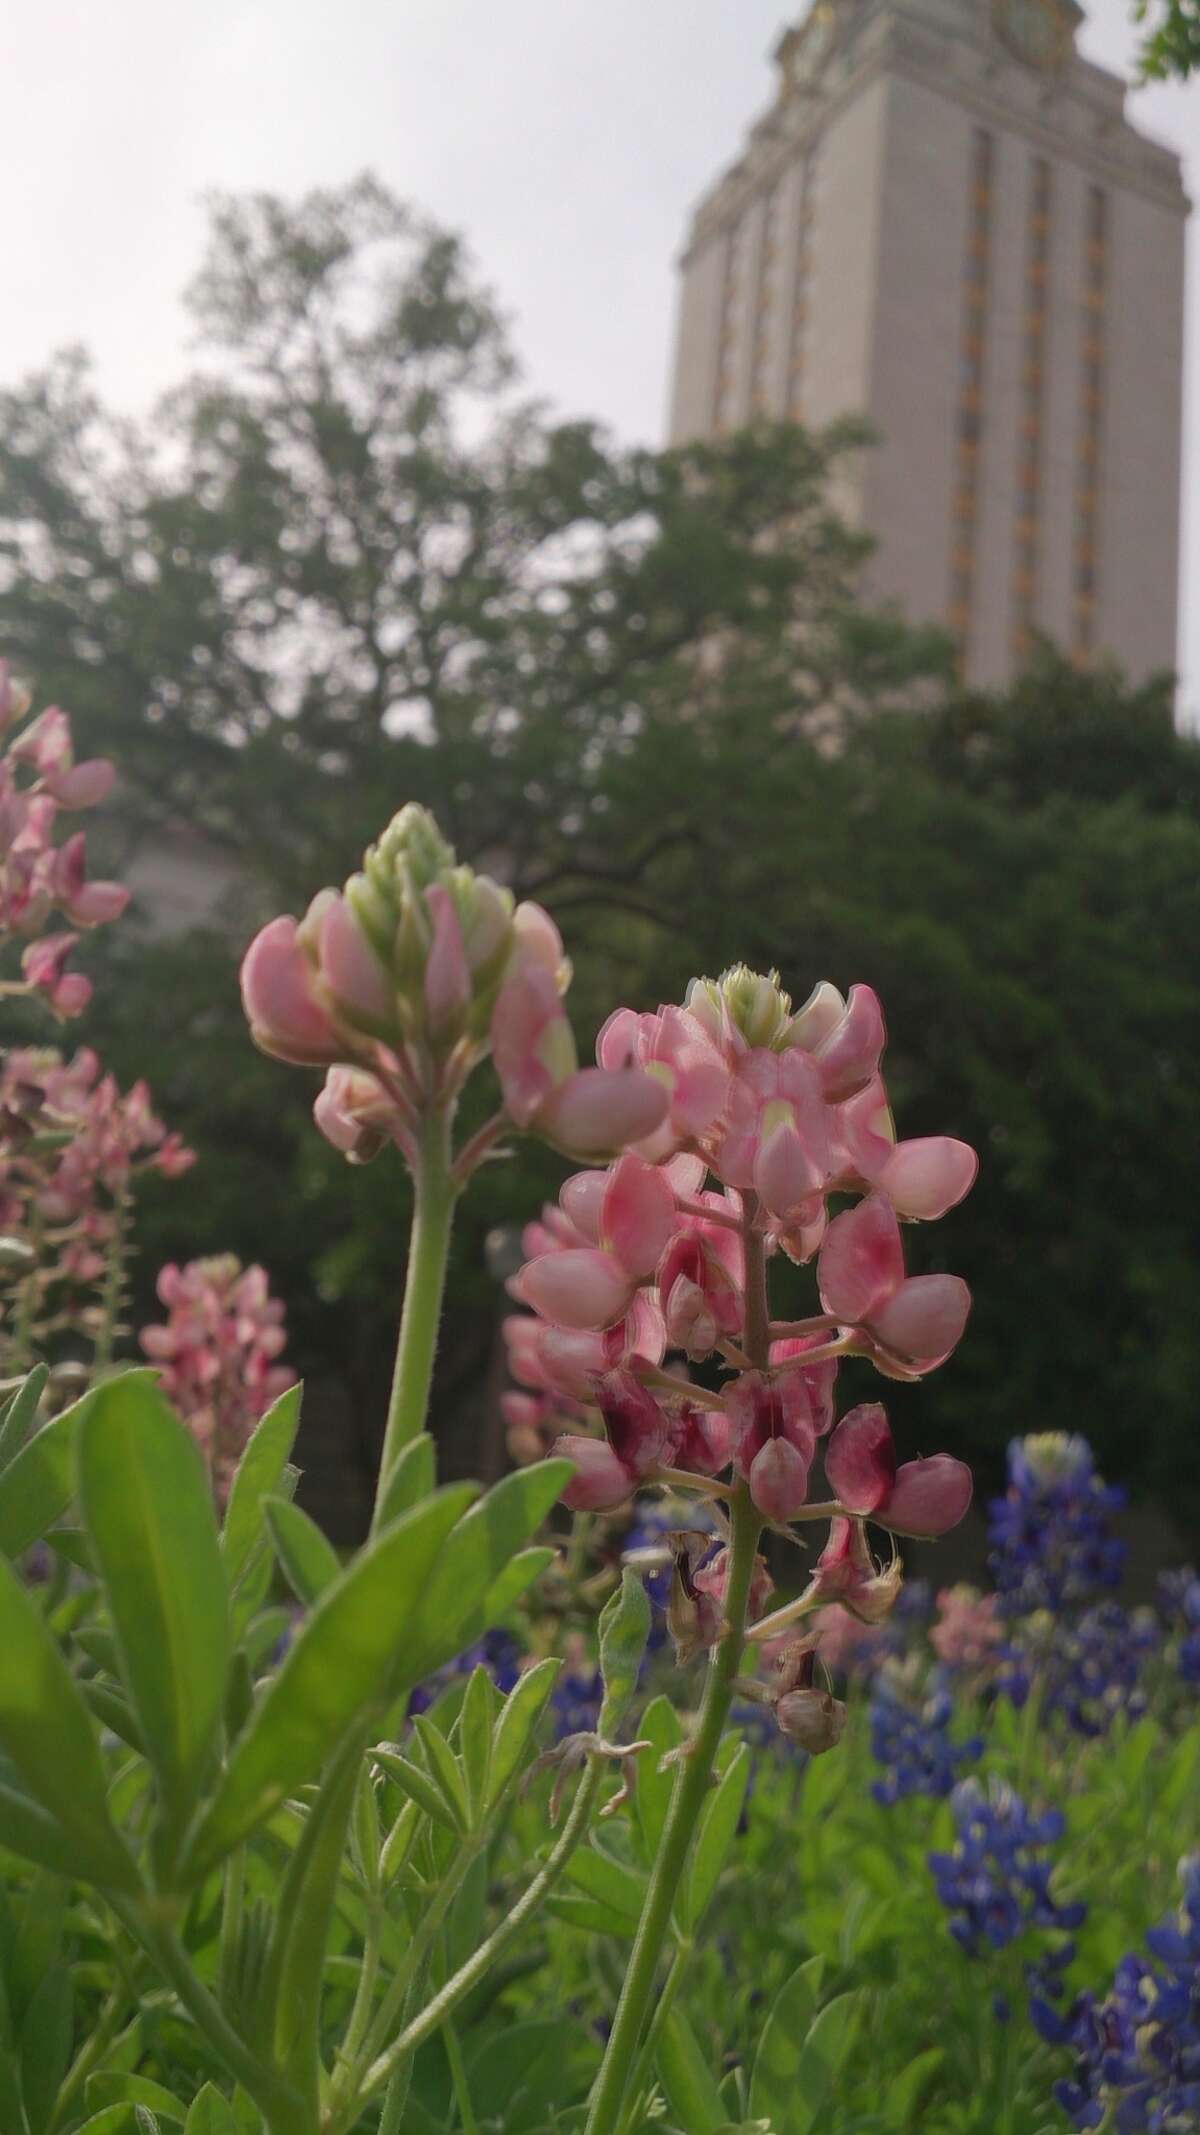 The suspicious bluebonnets started to fade at The University of Texas at Austin.  